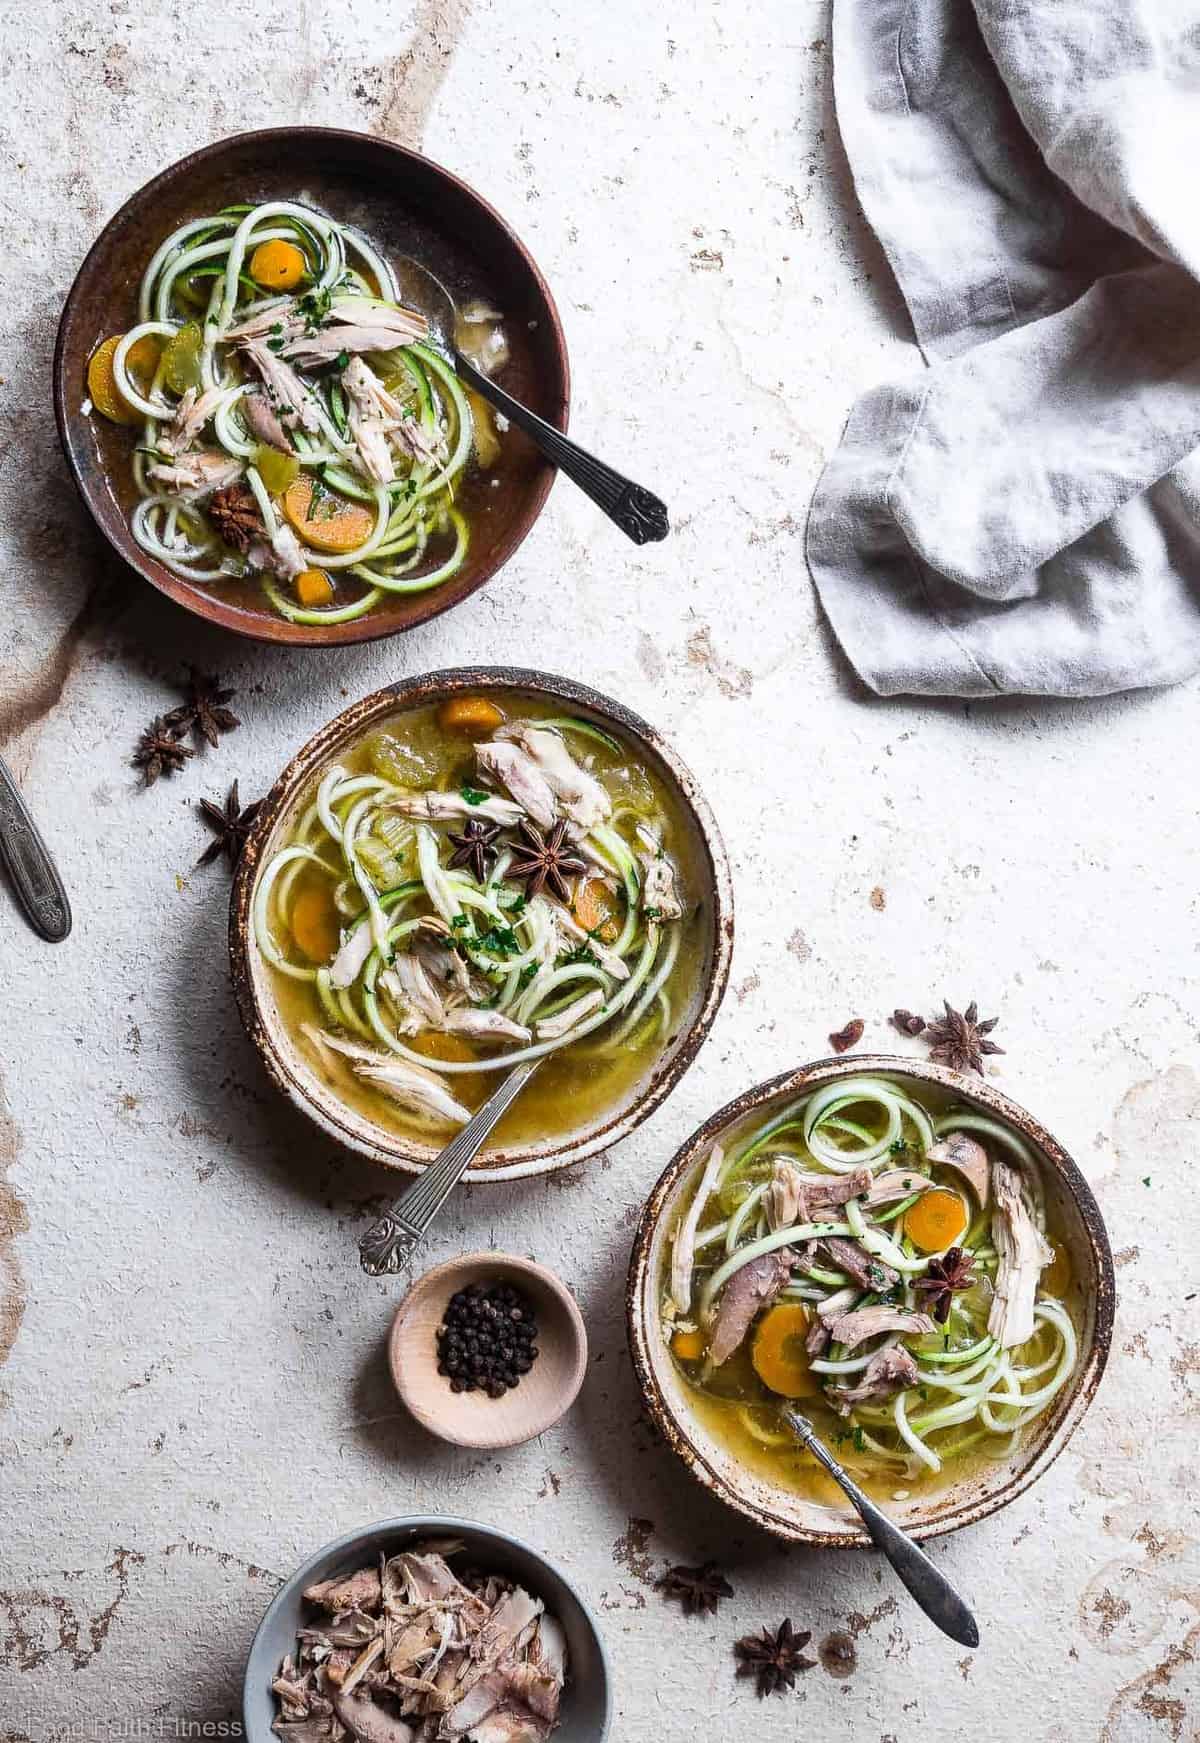 Low carb Chicken Zucchini Noodle Soup - This easy homemade healthy keto Chicken Zoodle Soup uses zucchini noodles so it's gluten free, low carb, paleo, whole30 AND packed with protein! You won't miss the noodles! | #Foodfaithfitness | #Glutenfree #Lowcarb #Keto #Whole30 #Paleo